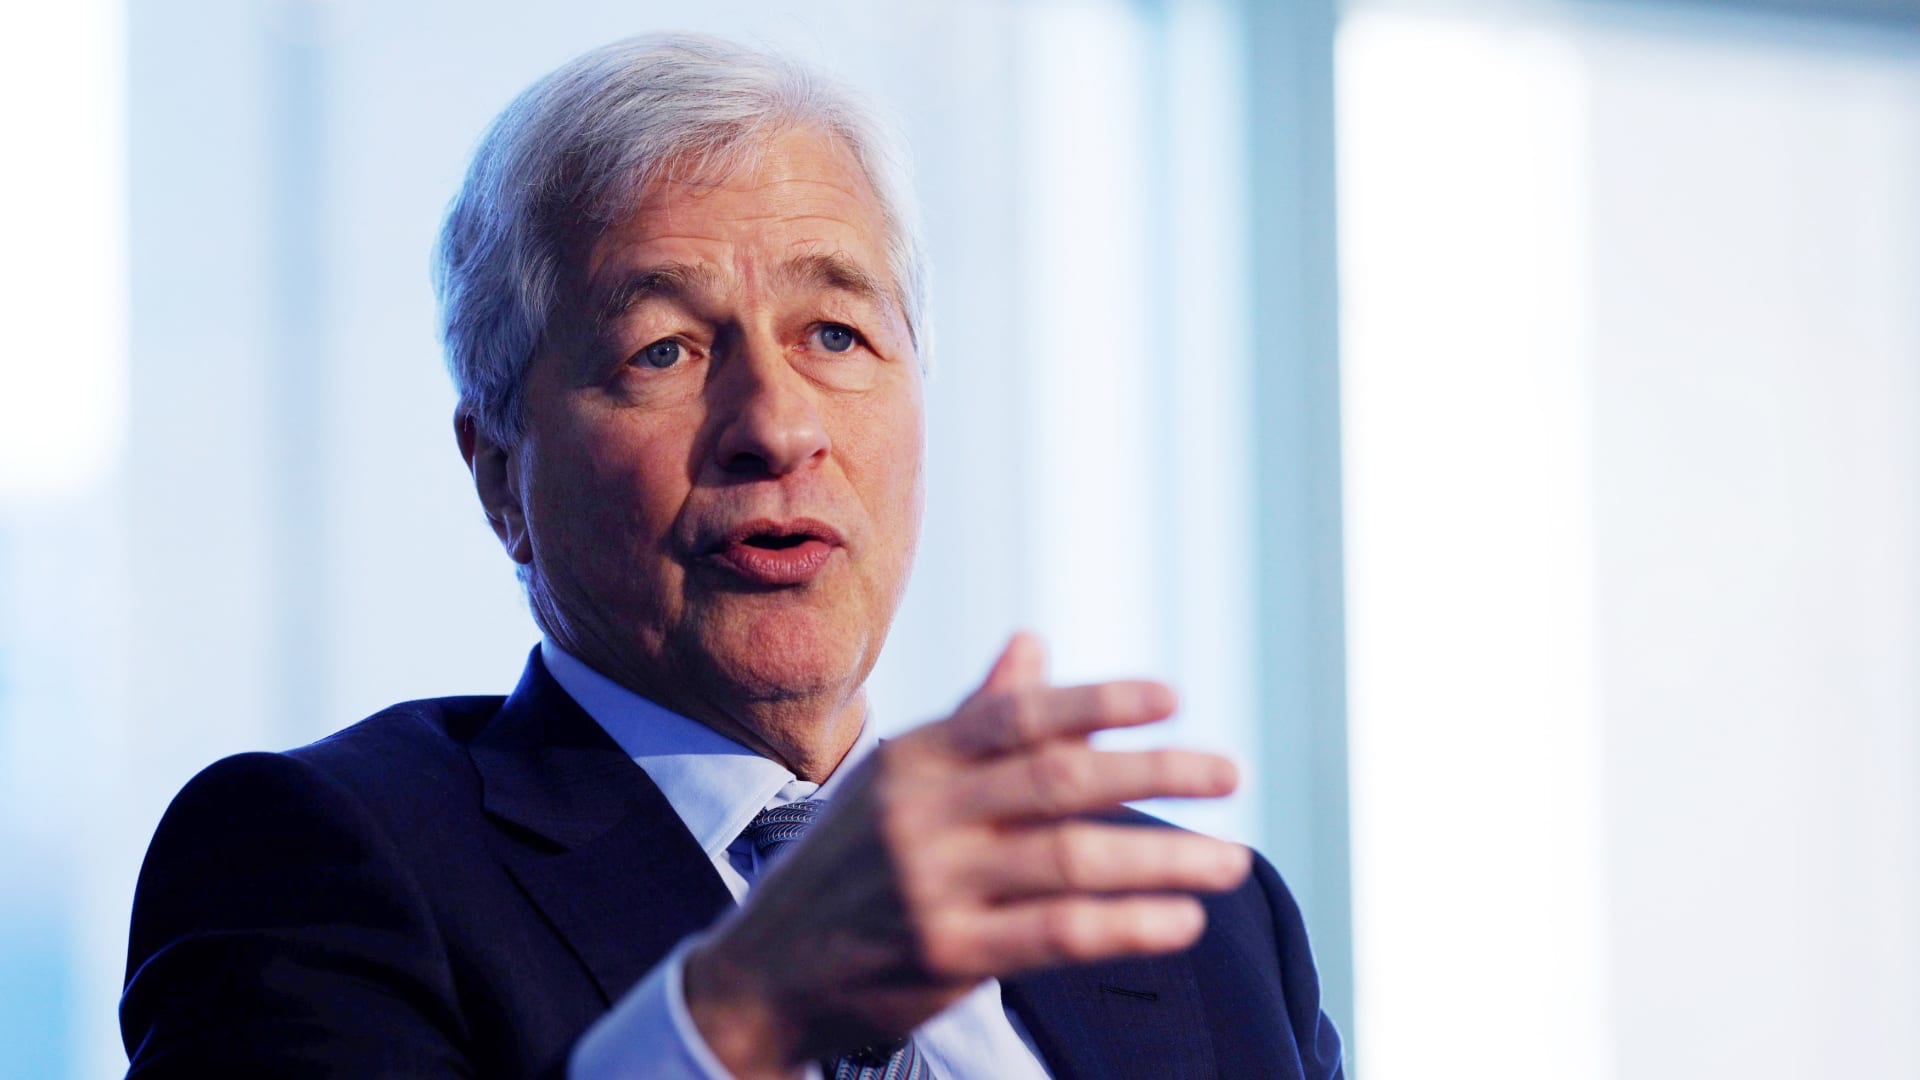 JPMorgan tells employees the bank will pay for travel to states that allow abortion